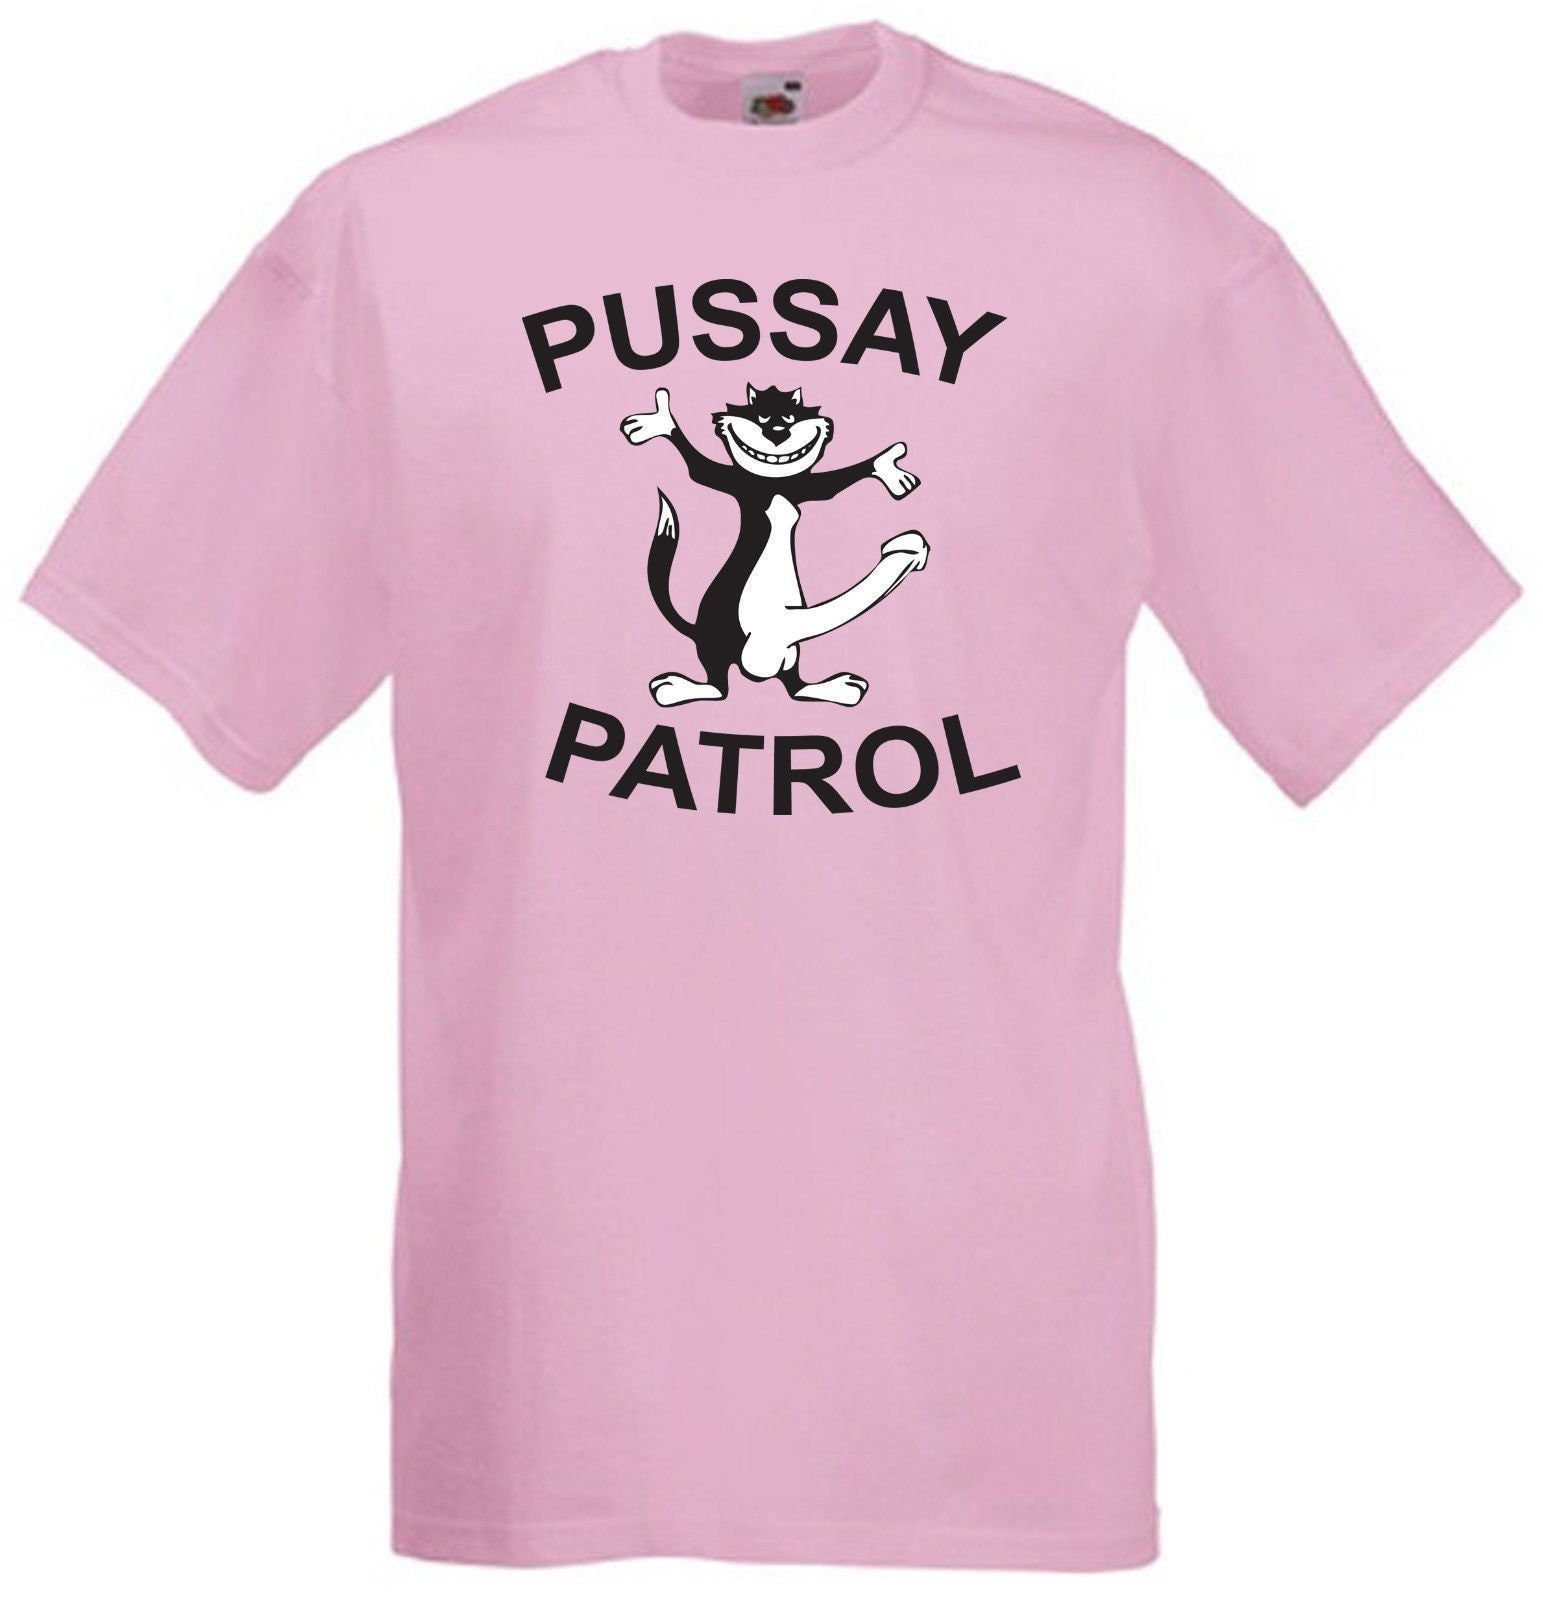 Patrol Do T Shirt Personalised With Name on - Etsy